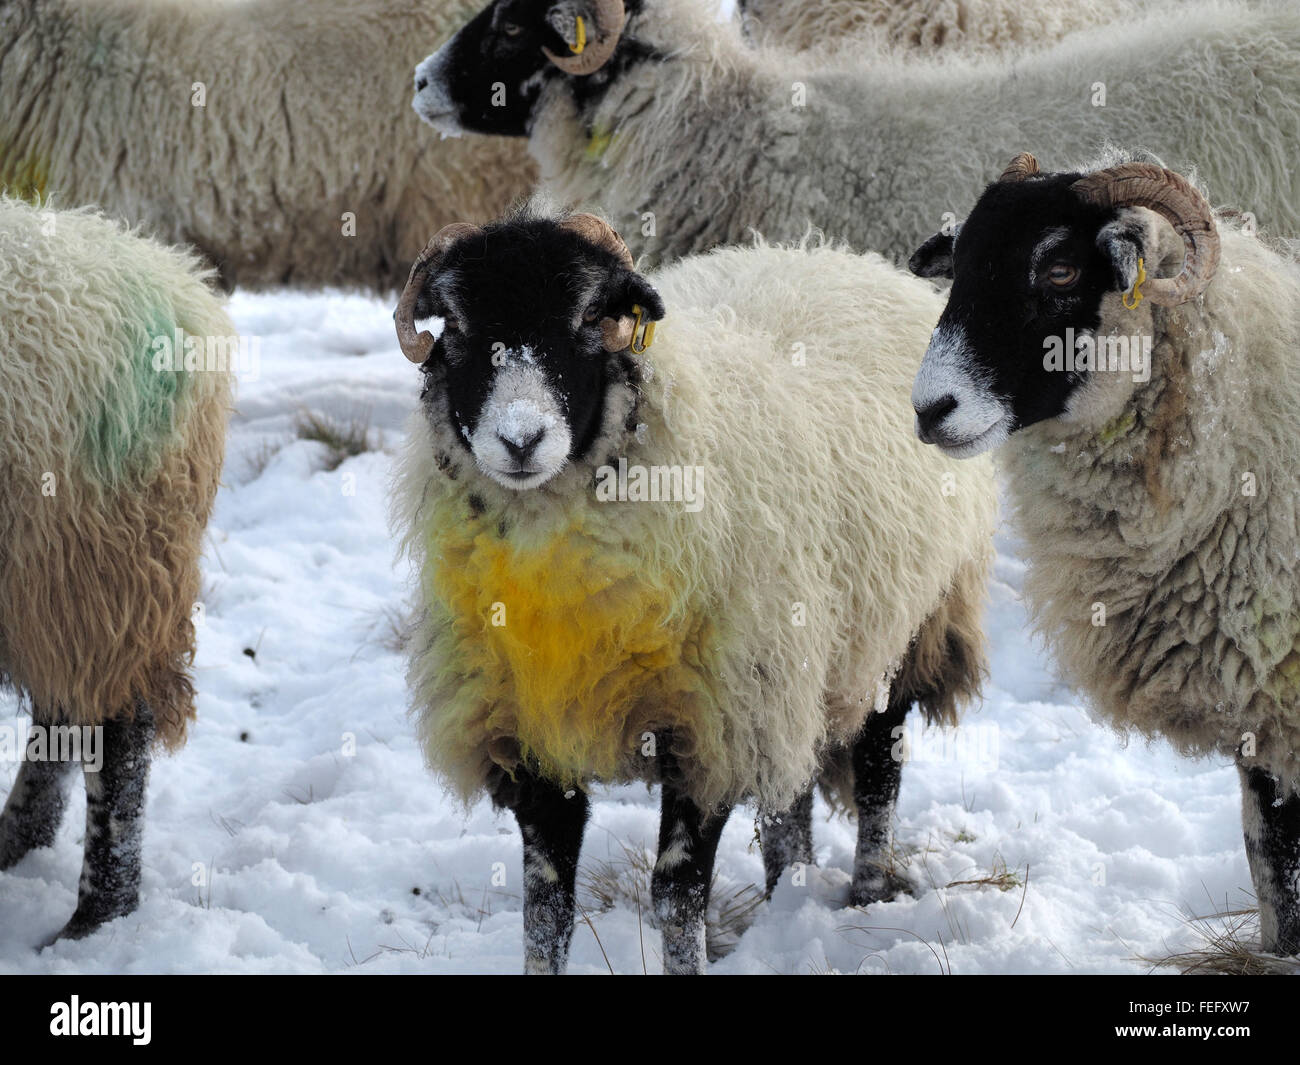 tup or ram with yellow died chest and snow on face in flock of black faced sheep waiting for feed in snowy winter conditions Stock Photo